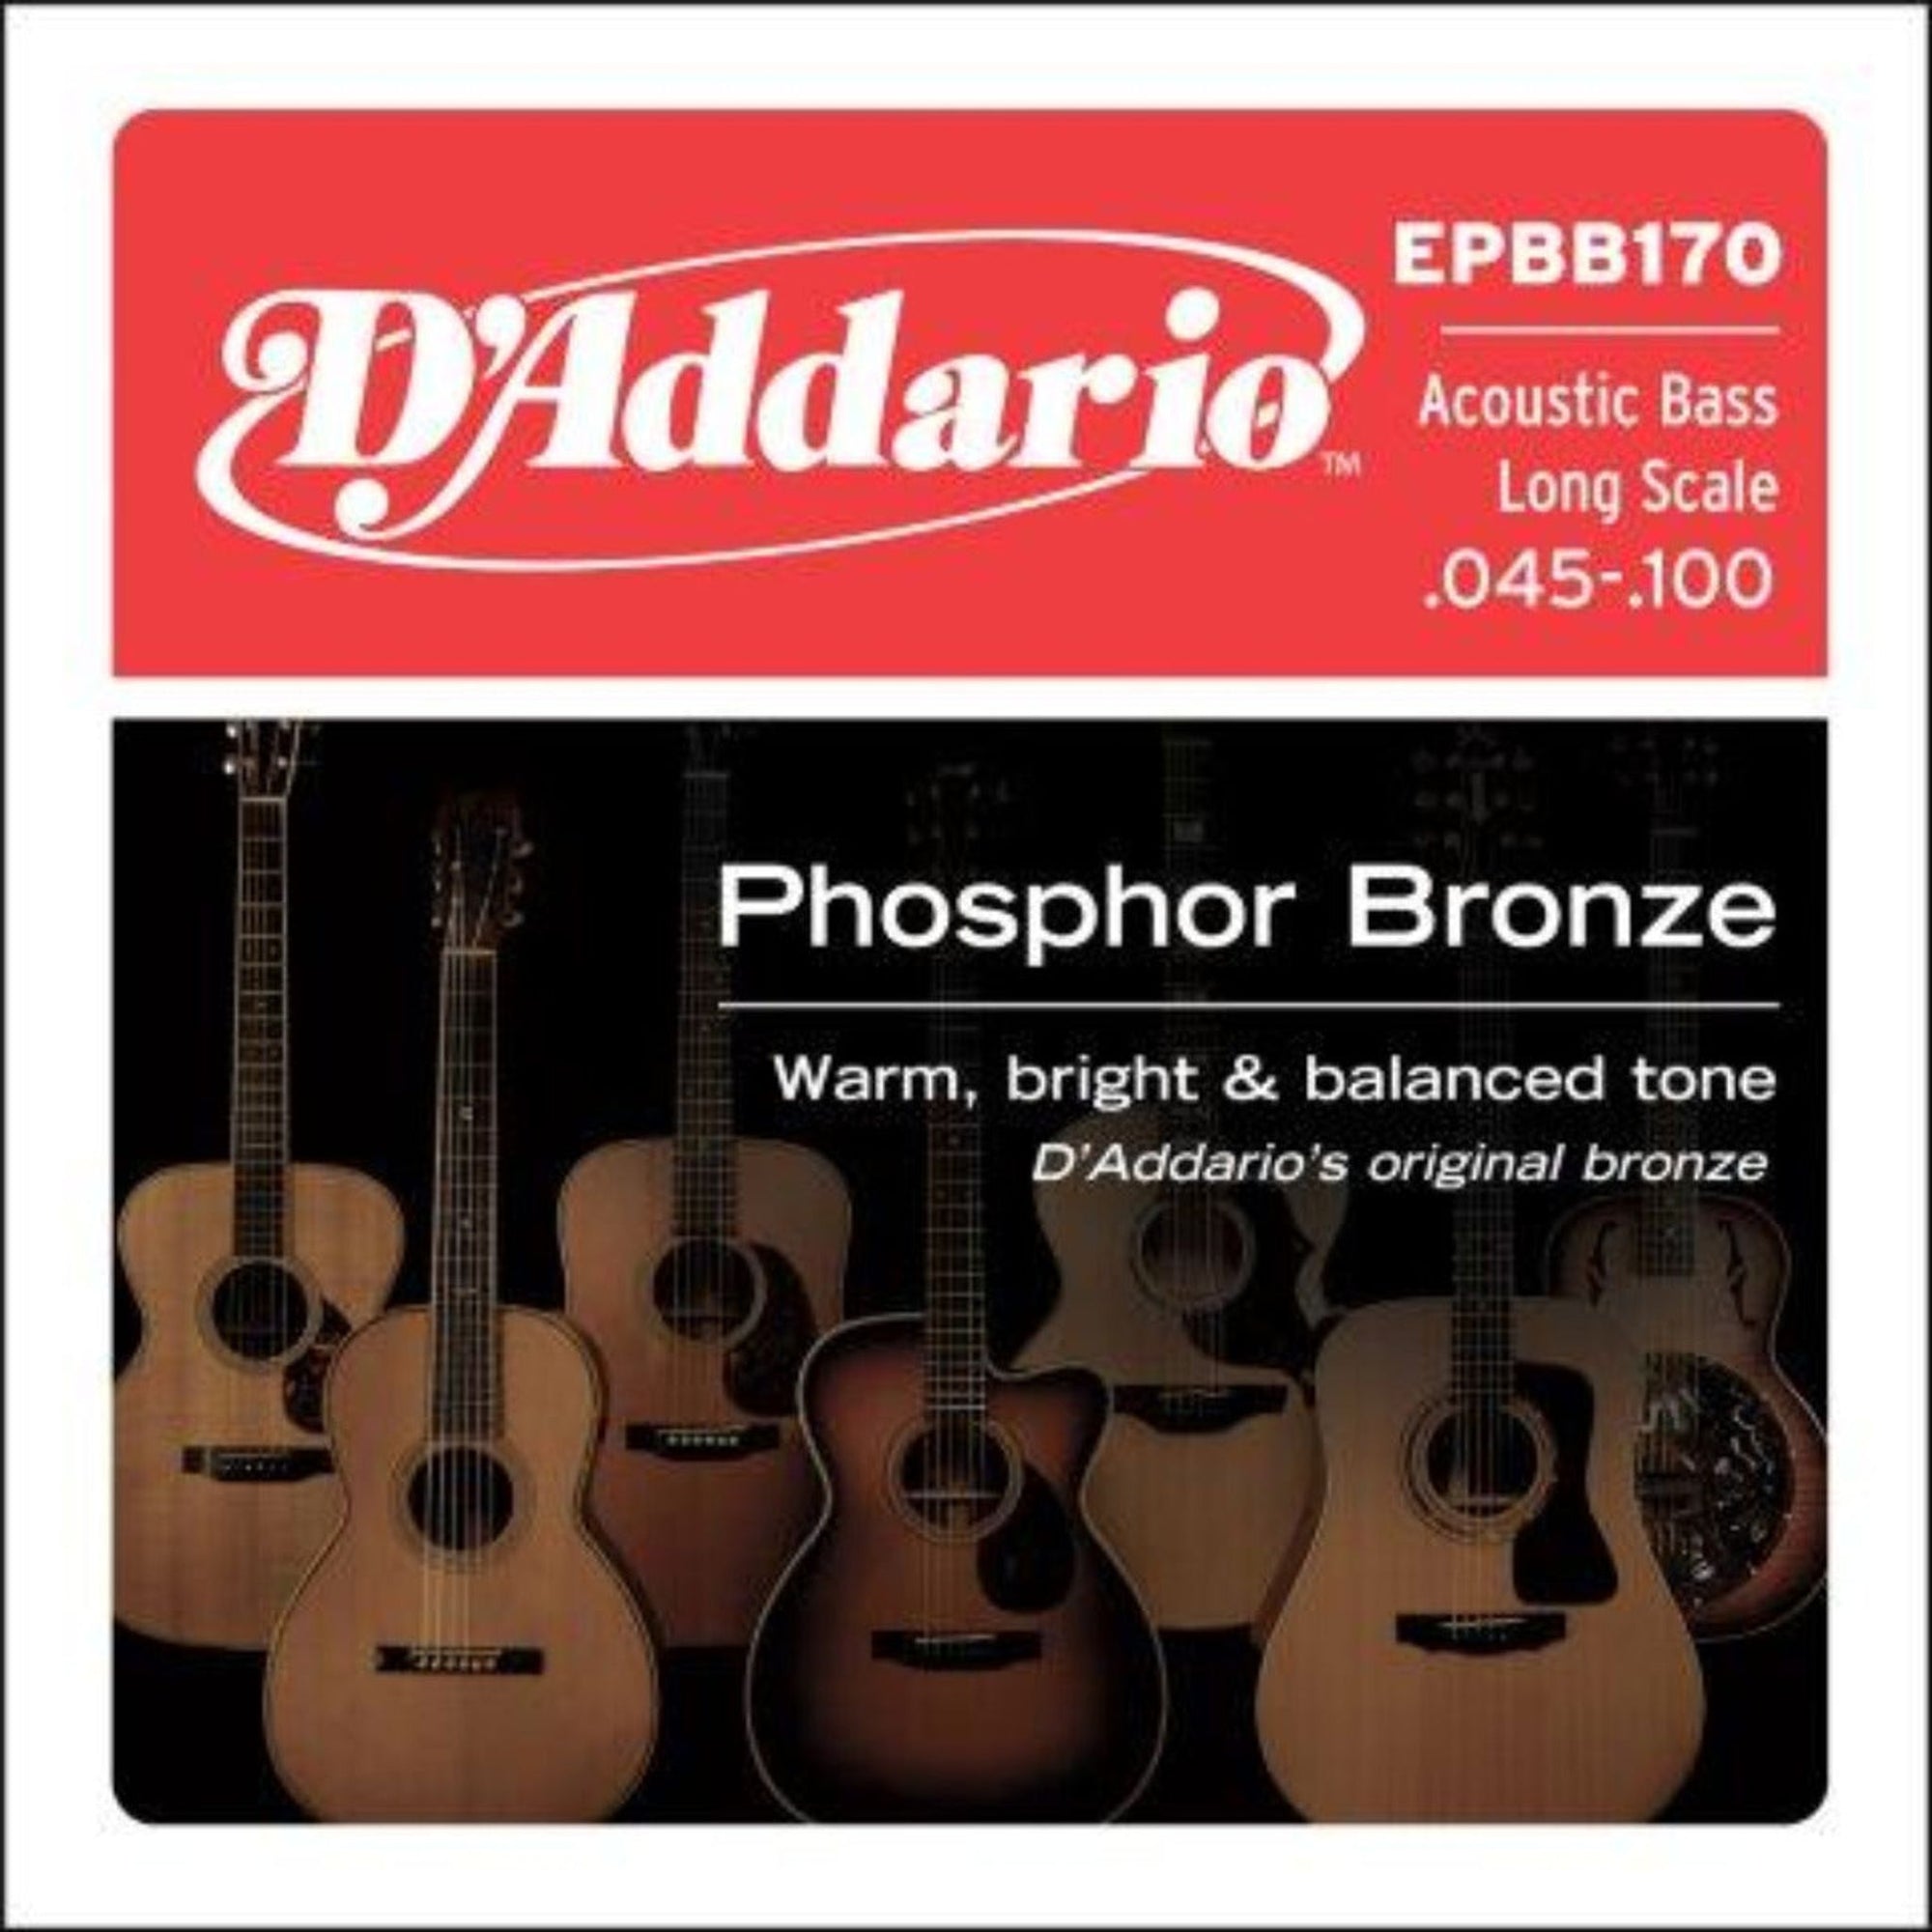 D'Addario's most popular acoustic bass set, EPBB170 provides a rich, deep and projecting tone. Phosphor Bronze was introduced to string making by D'Addario in 1974 and has become synonymous with warm, bright, and well balanced acoustic tone.